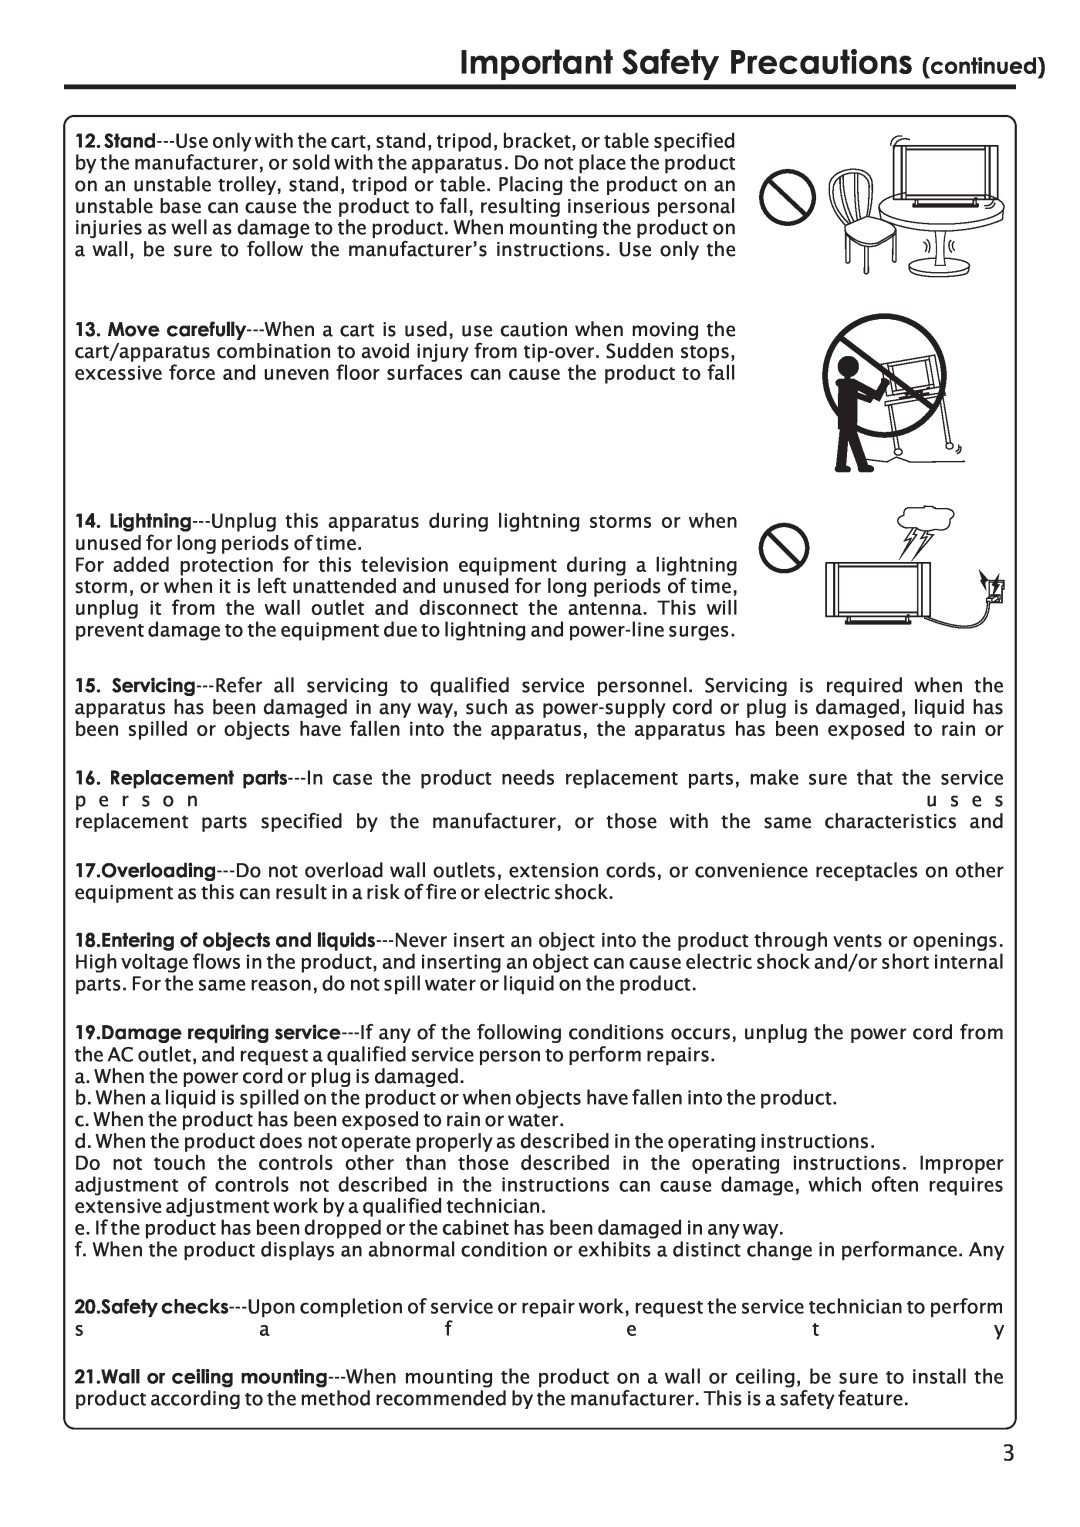 Primate Systems PDP TV manual Important Safety Precautions continued 